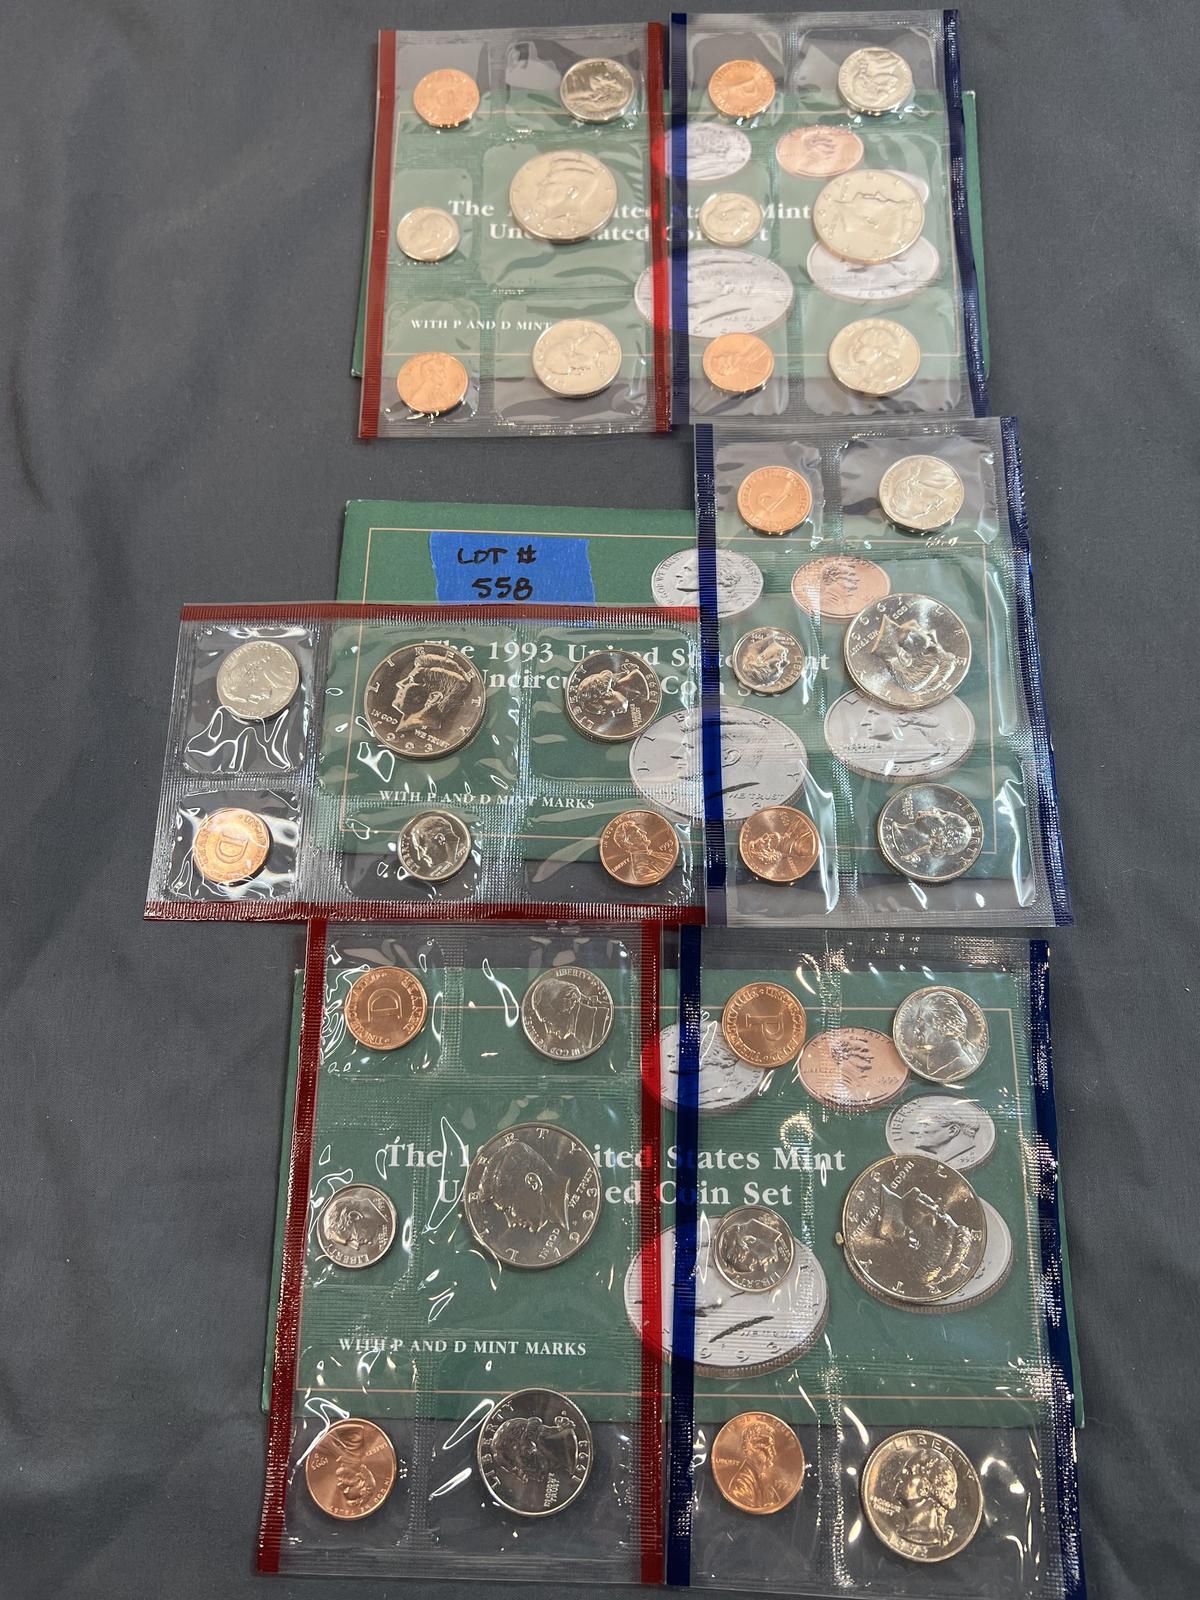 Three 1993 United States Mint Sets - Complete P&D